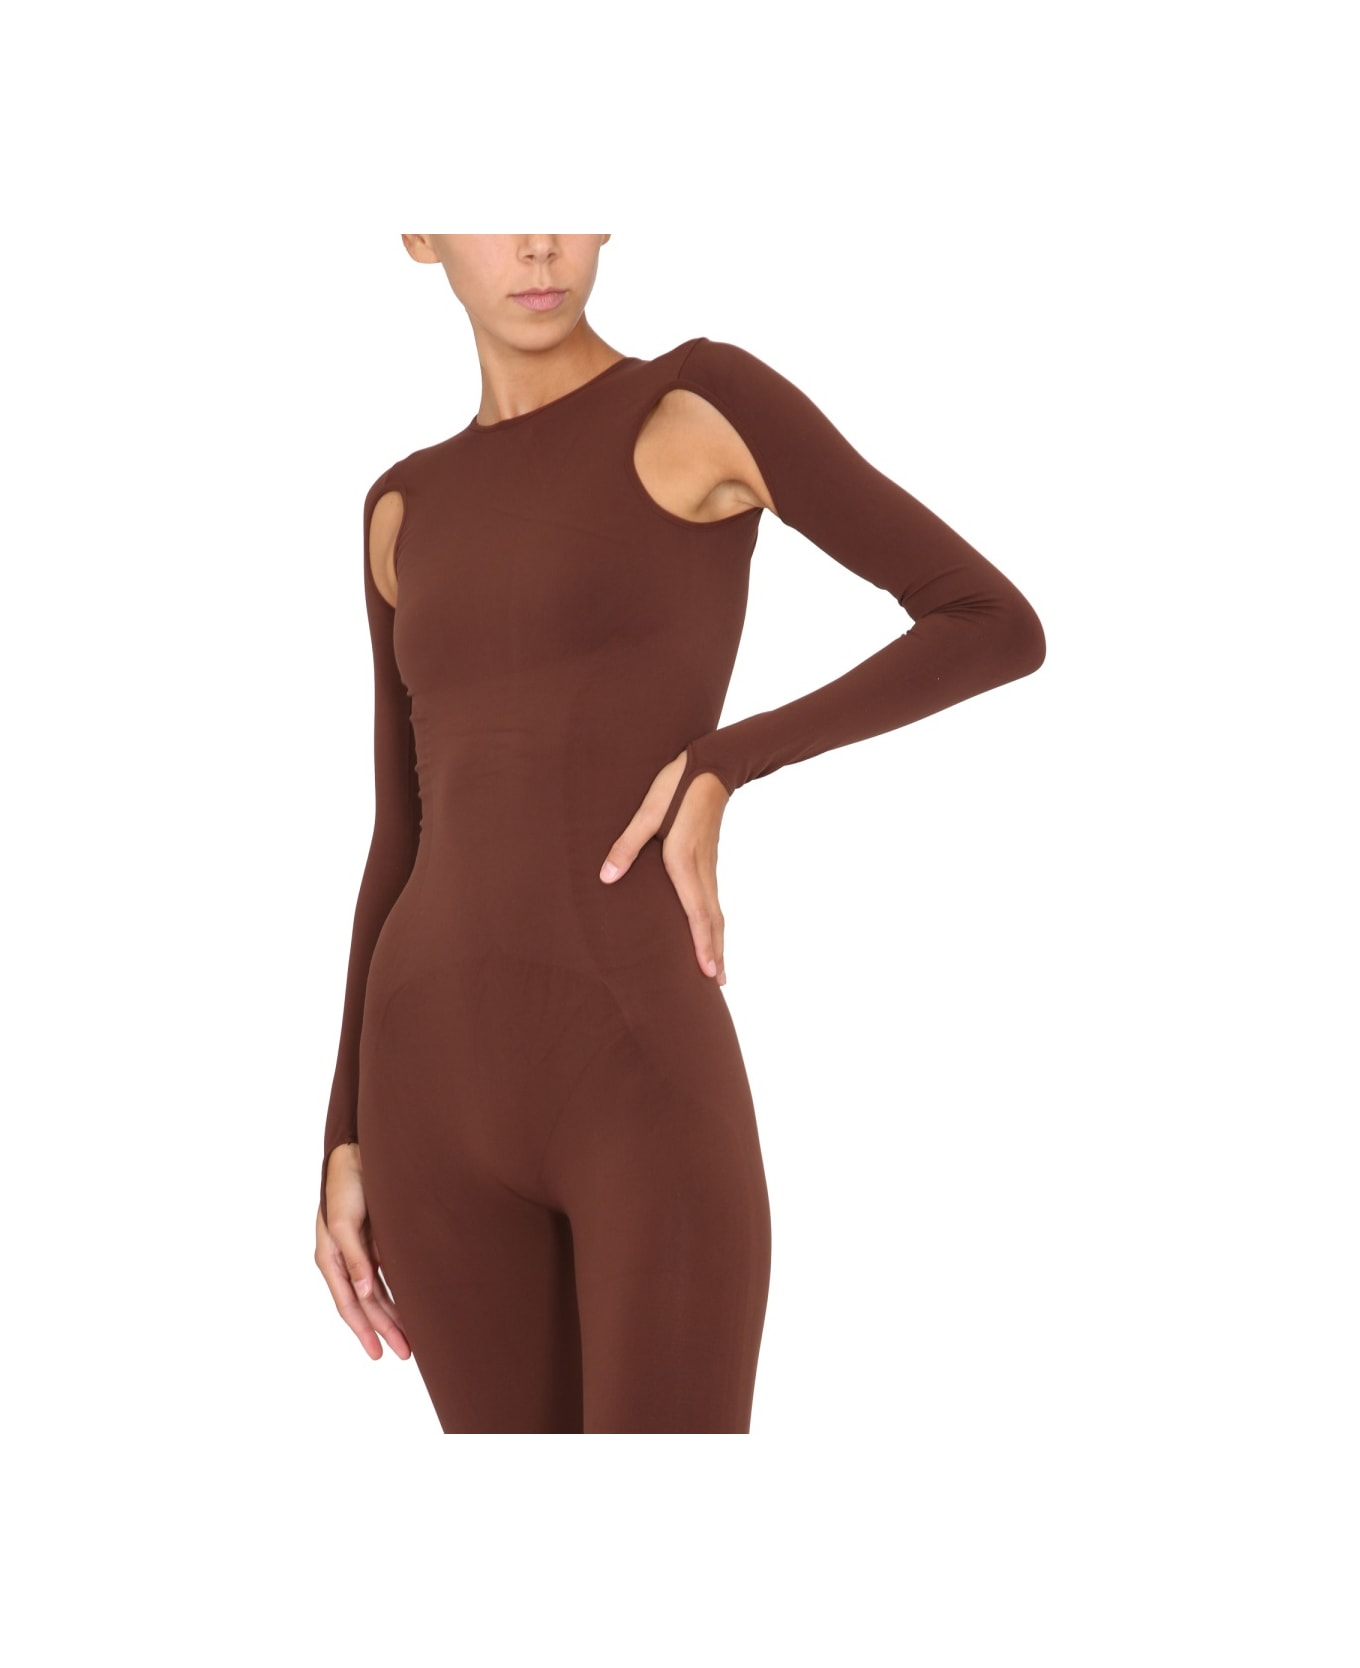 ANDREĀDAMO Full Jumpsuit With Cut-out Details - BROWN